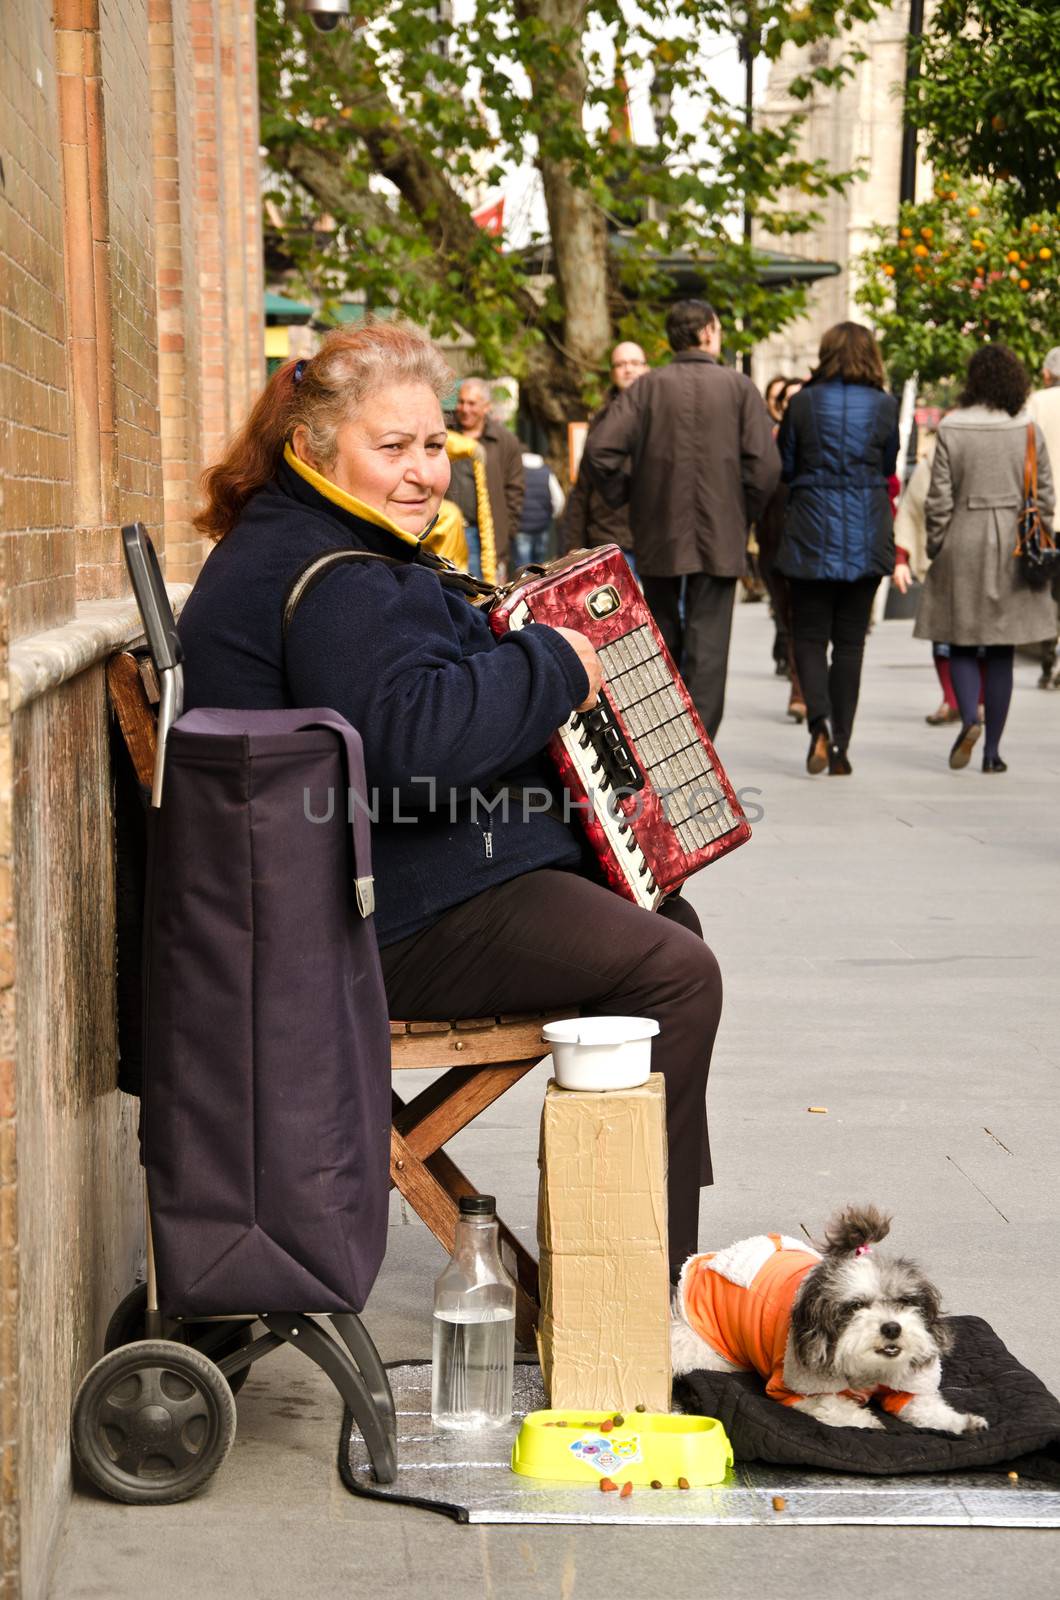 Lady with accordion, Seville Spain.